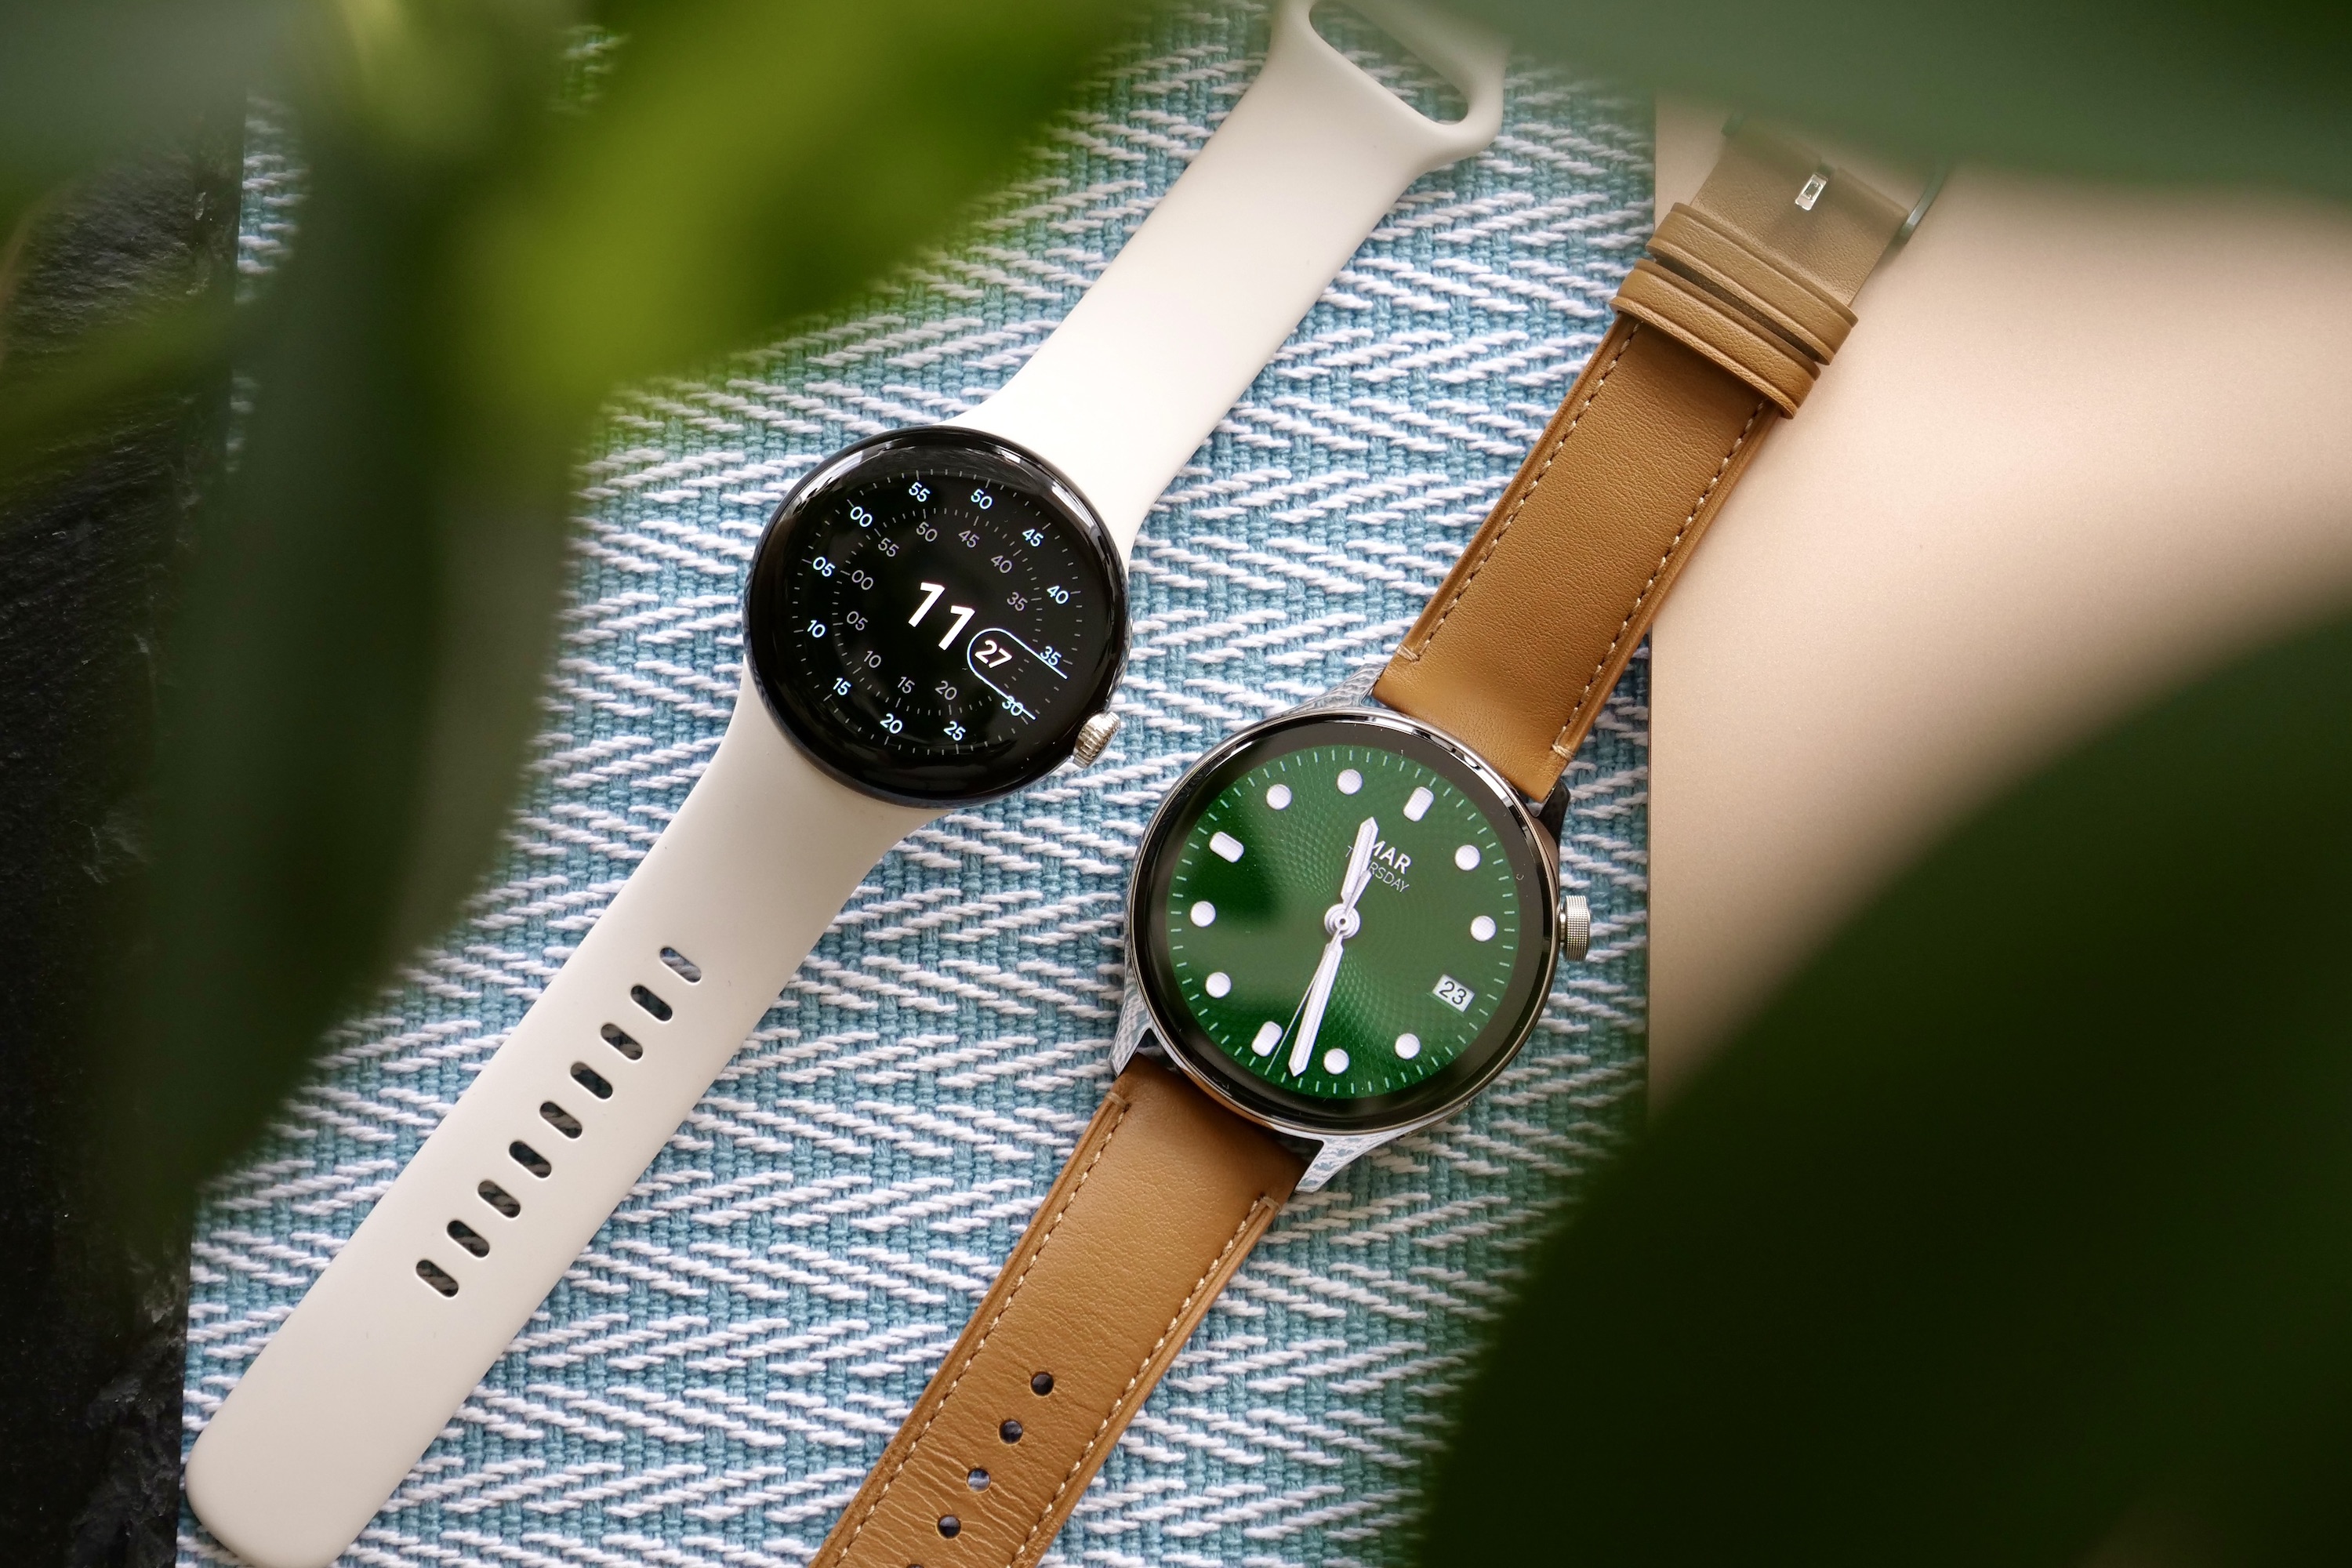 Pixel Watch 2 has new Wear OS rivals from OnePlus and Xiaomi